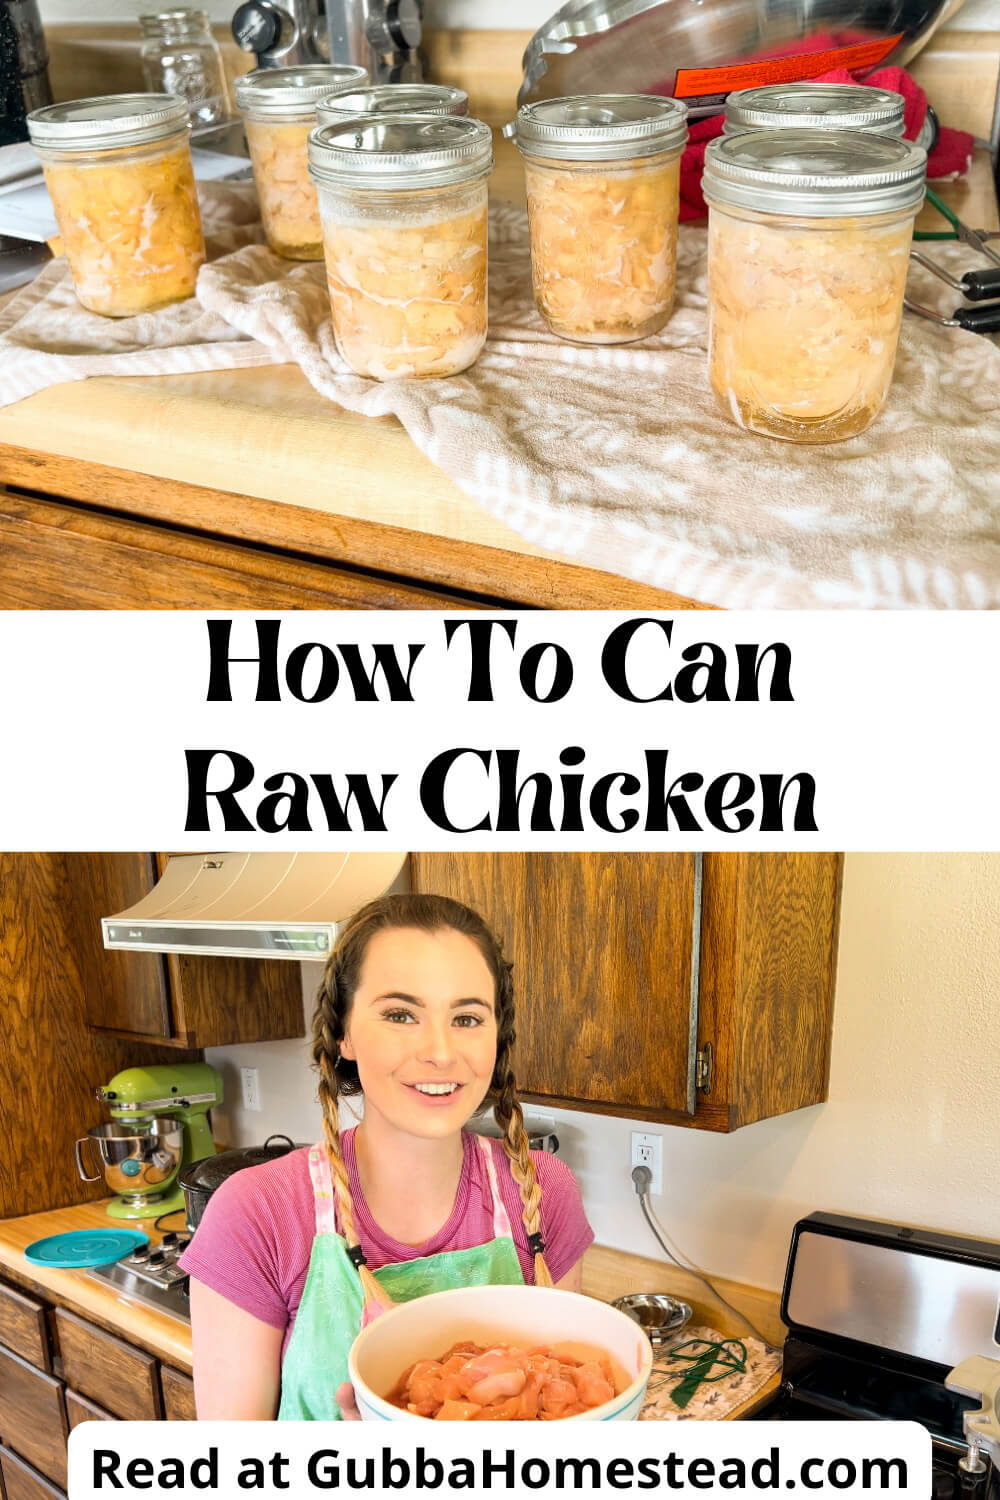 How To Can Raw Chicken